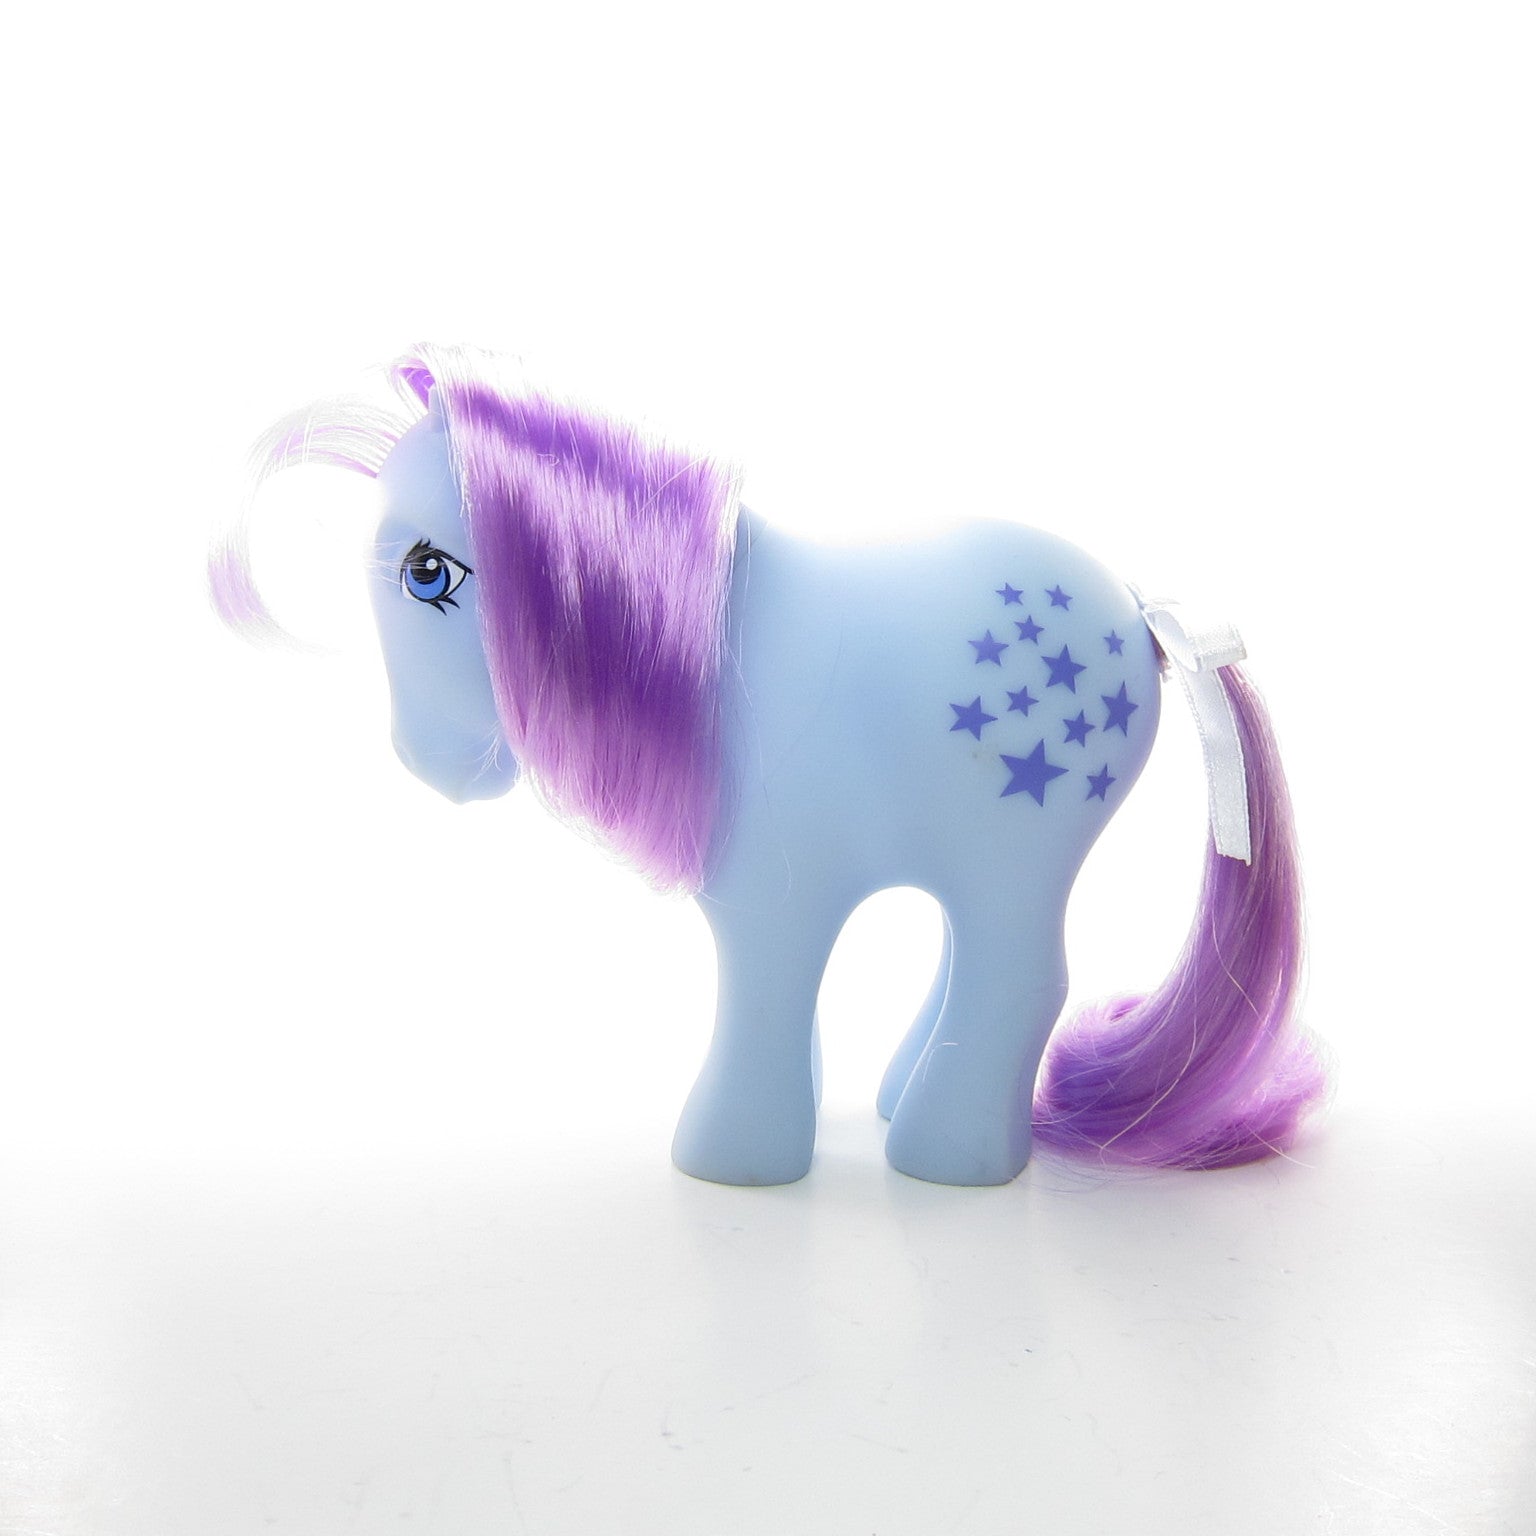 Super My Little Pony, blue and multicolored My Little Pony